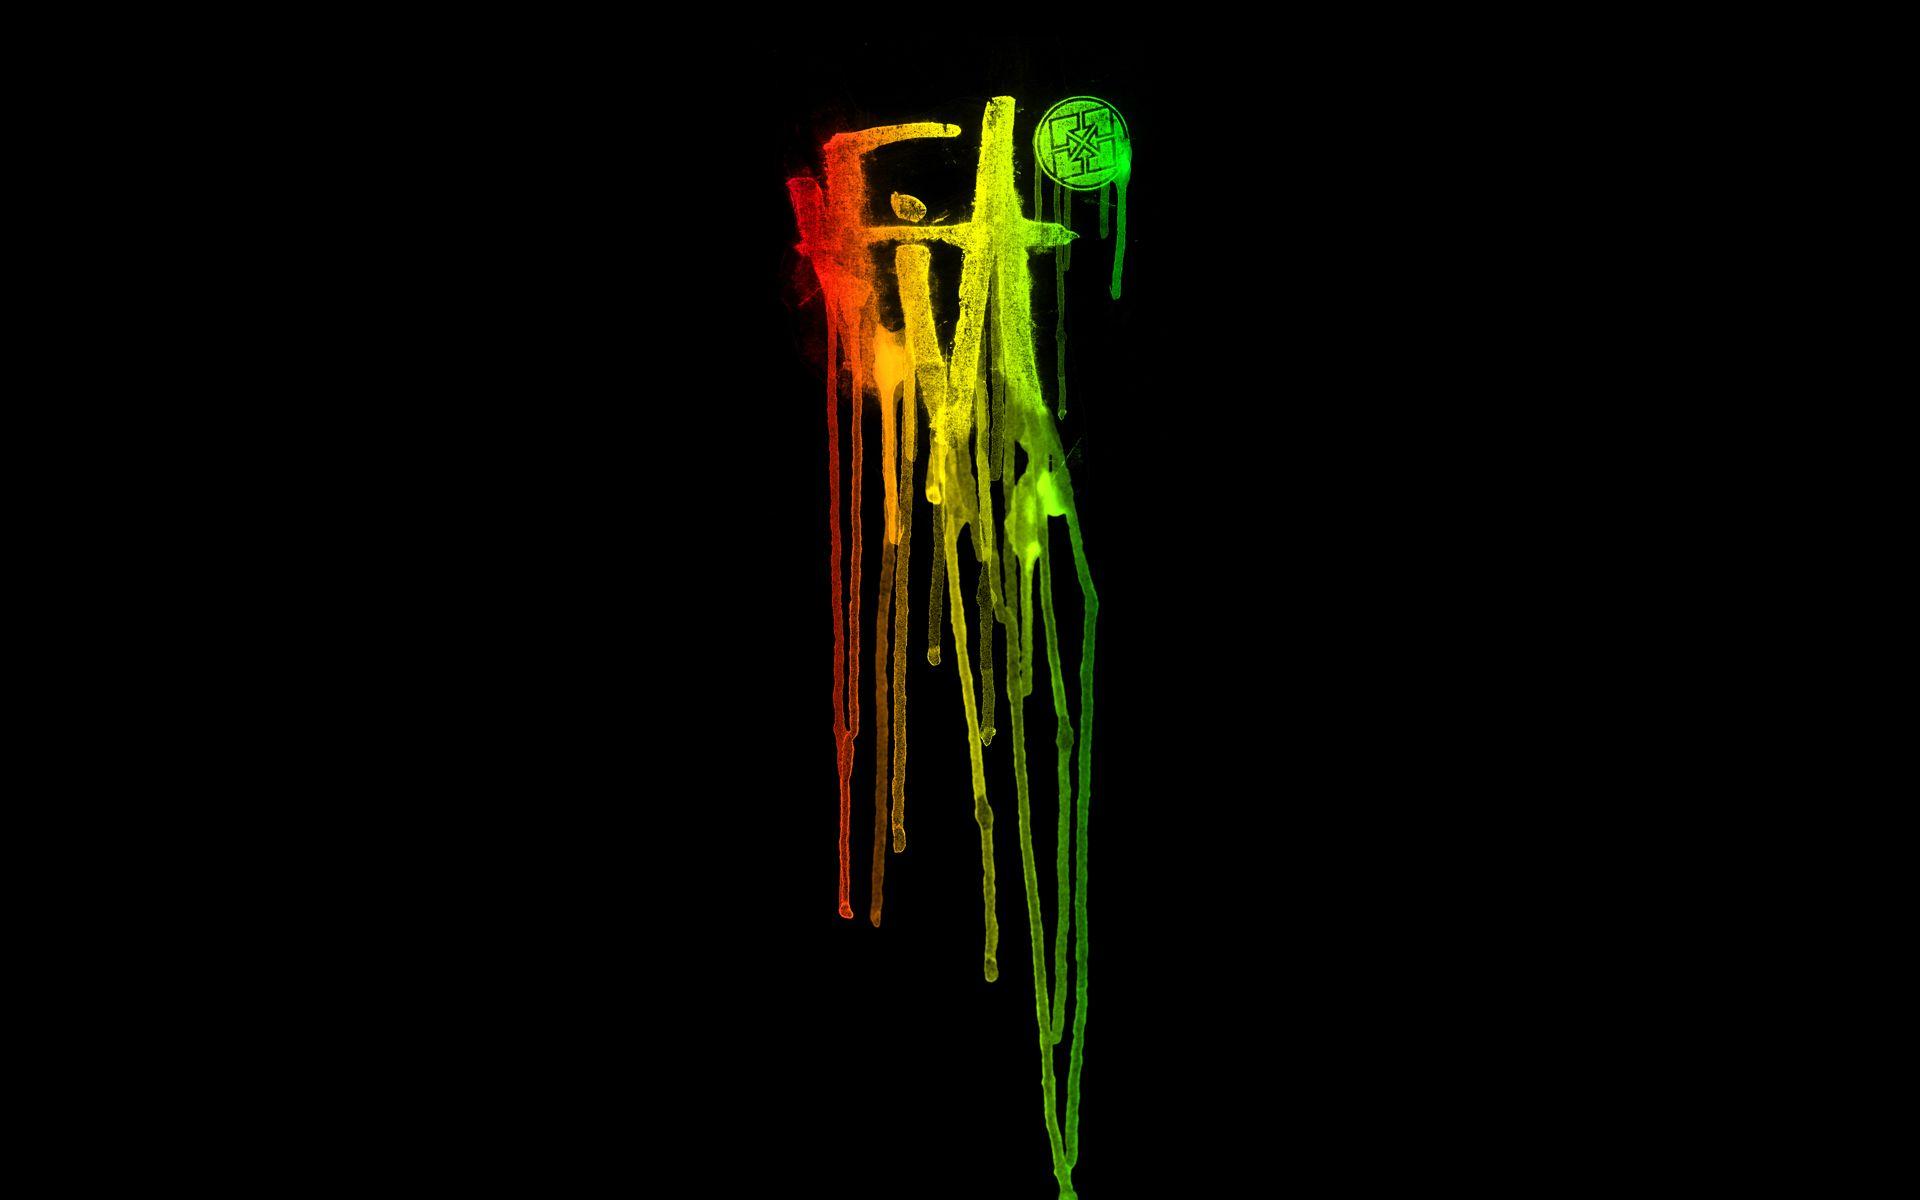 Awesome Background Image. Rasta Quality Wallpaper